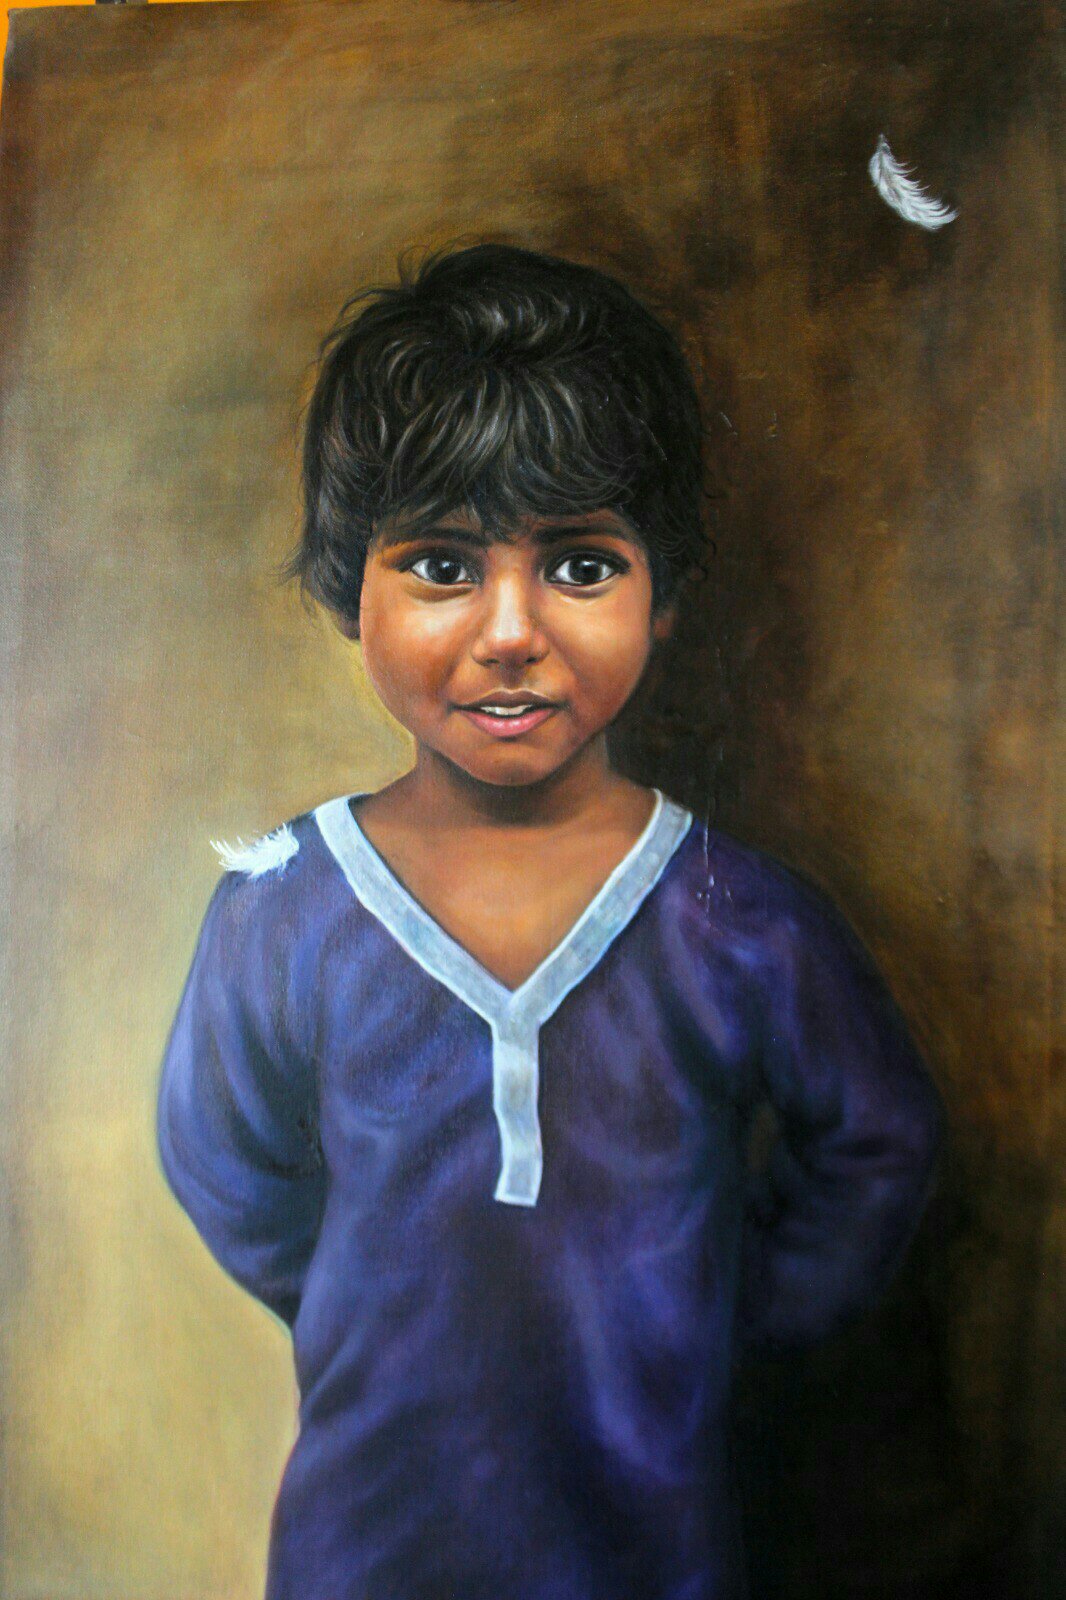 Medium: Oil on canvas <br> Size:  24x36 inches